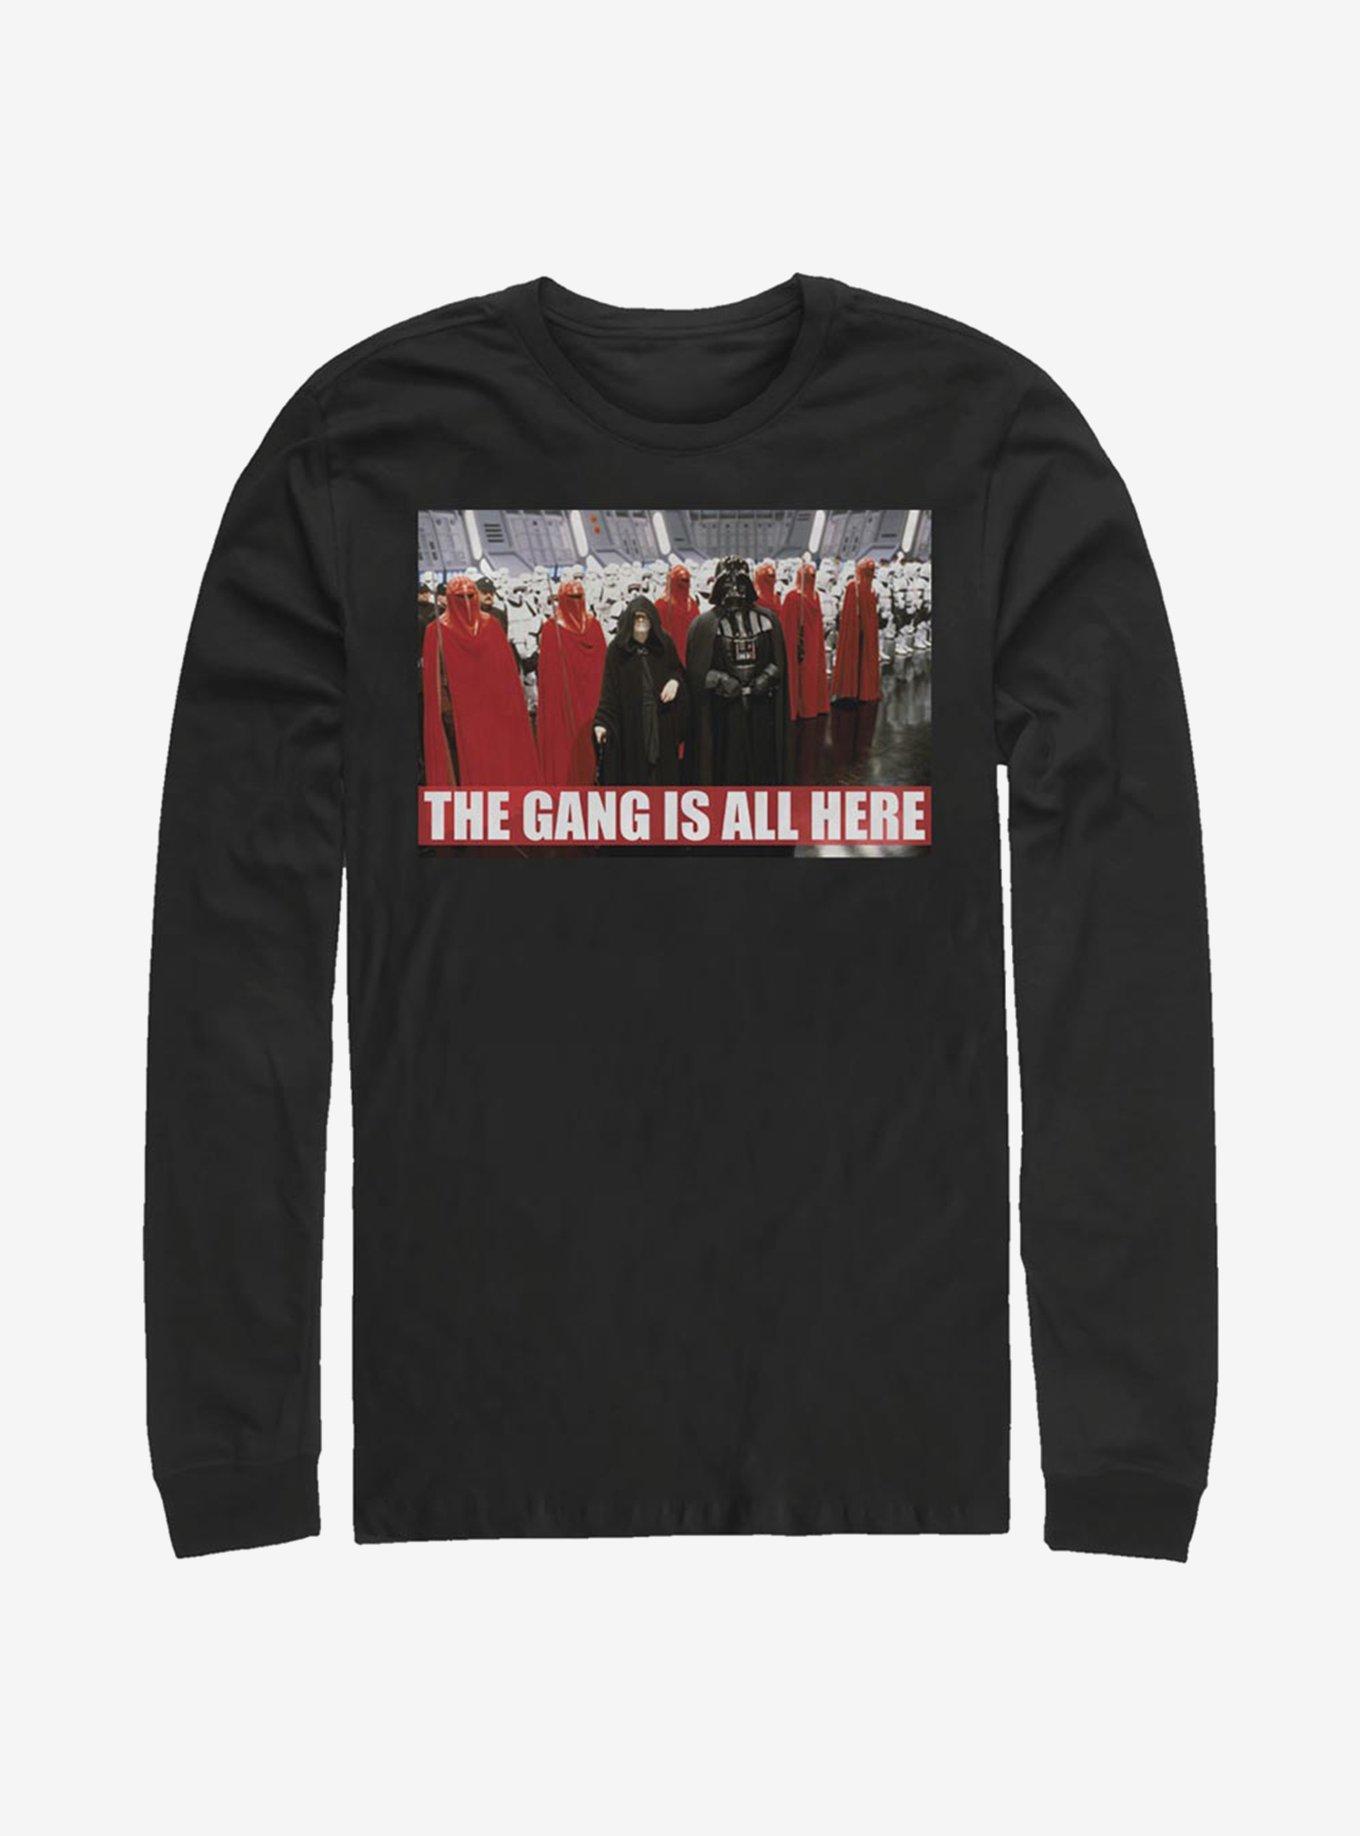 Star Wars The Gang Is All Here Long-Sleeve T-Shirt